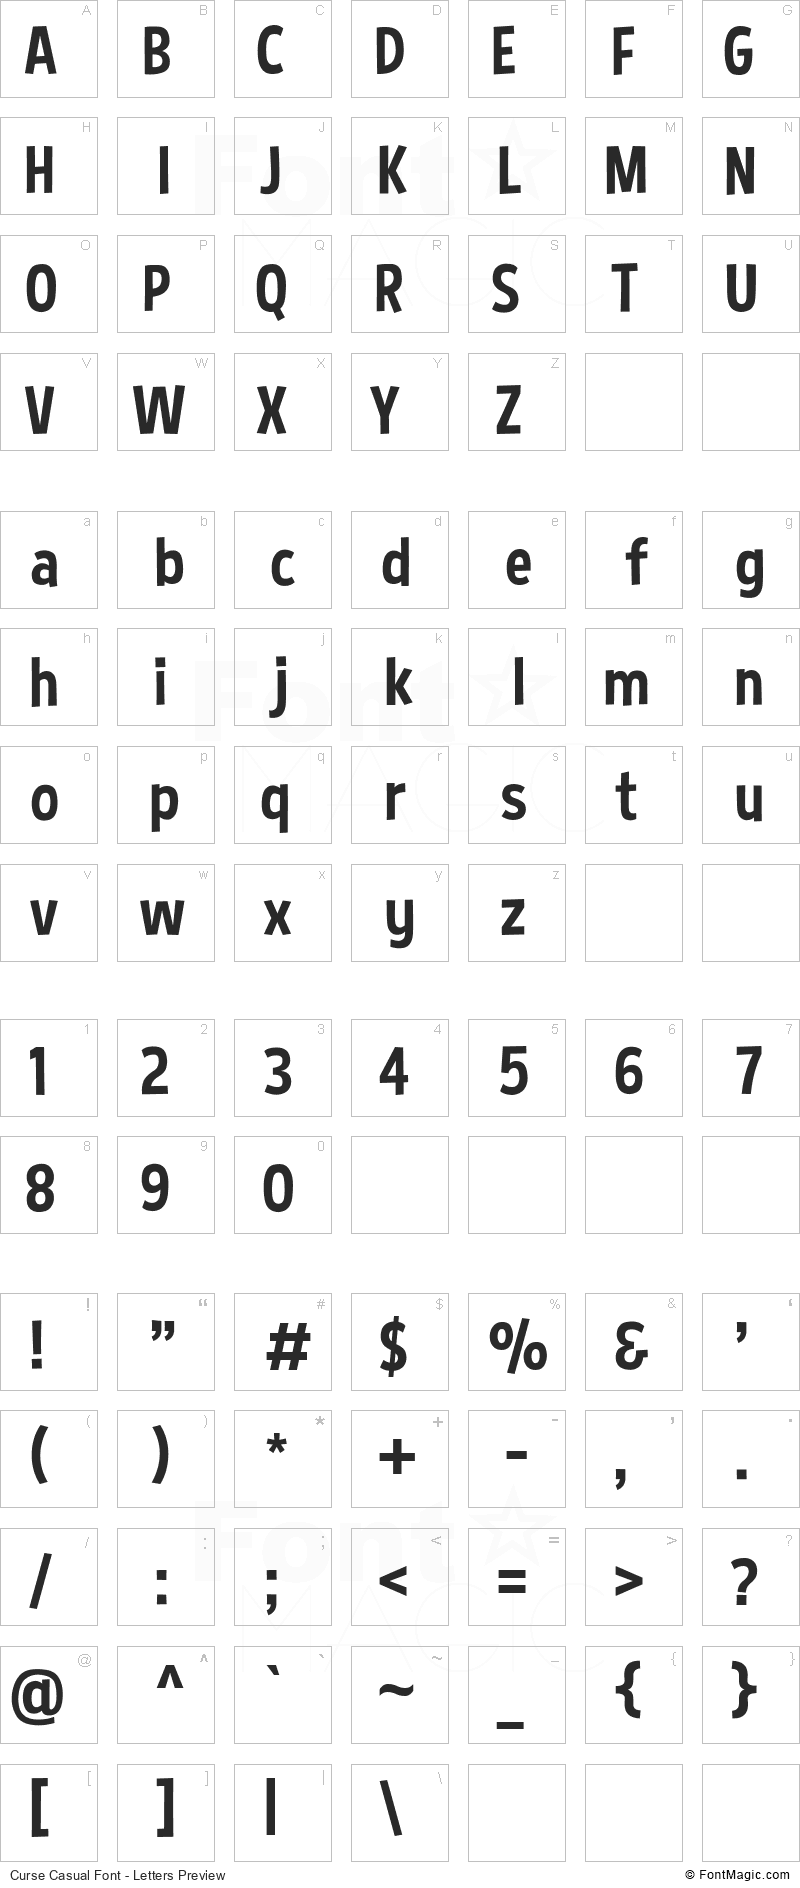 Curse Casual Font - All Latters Preview Chart